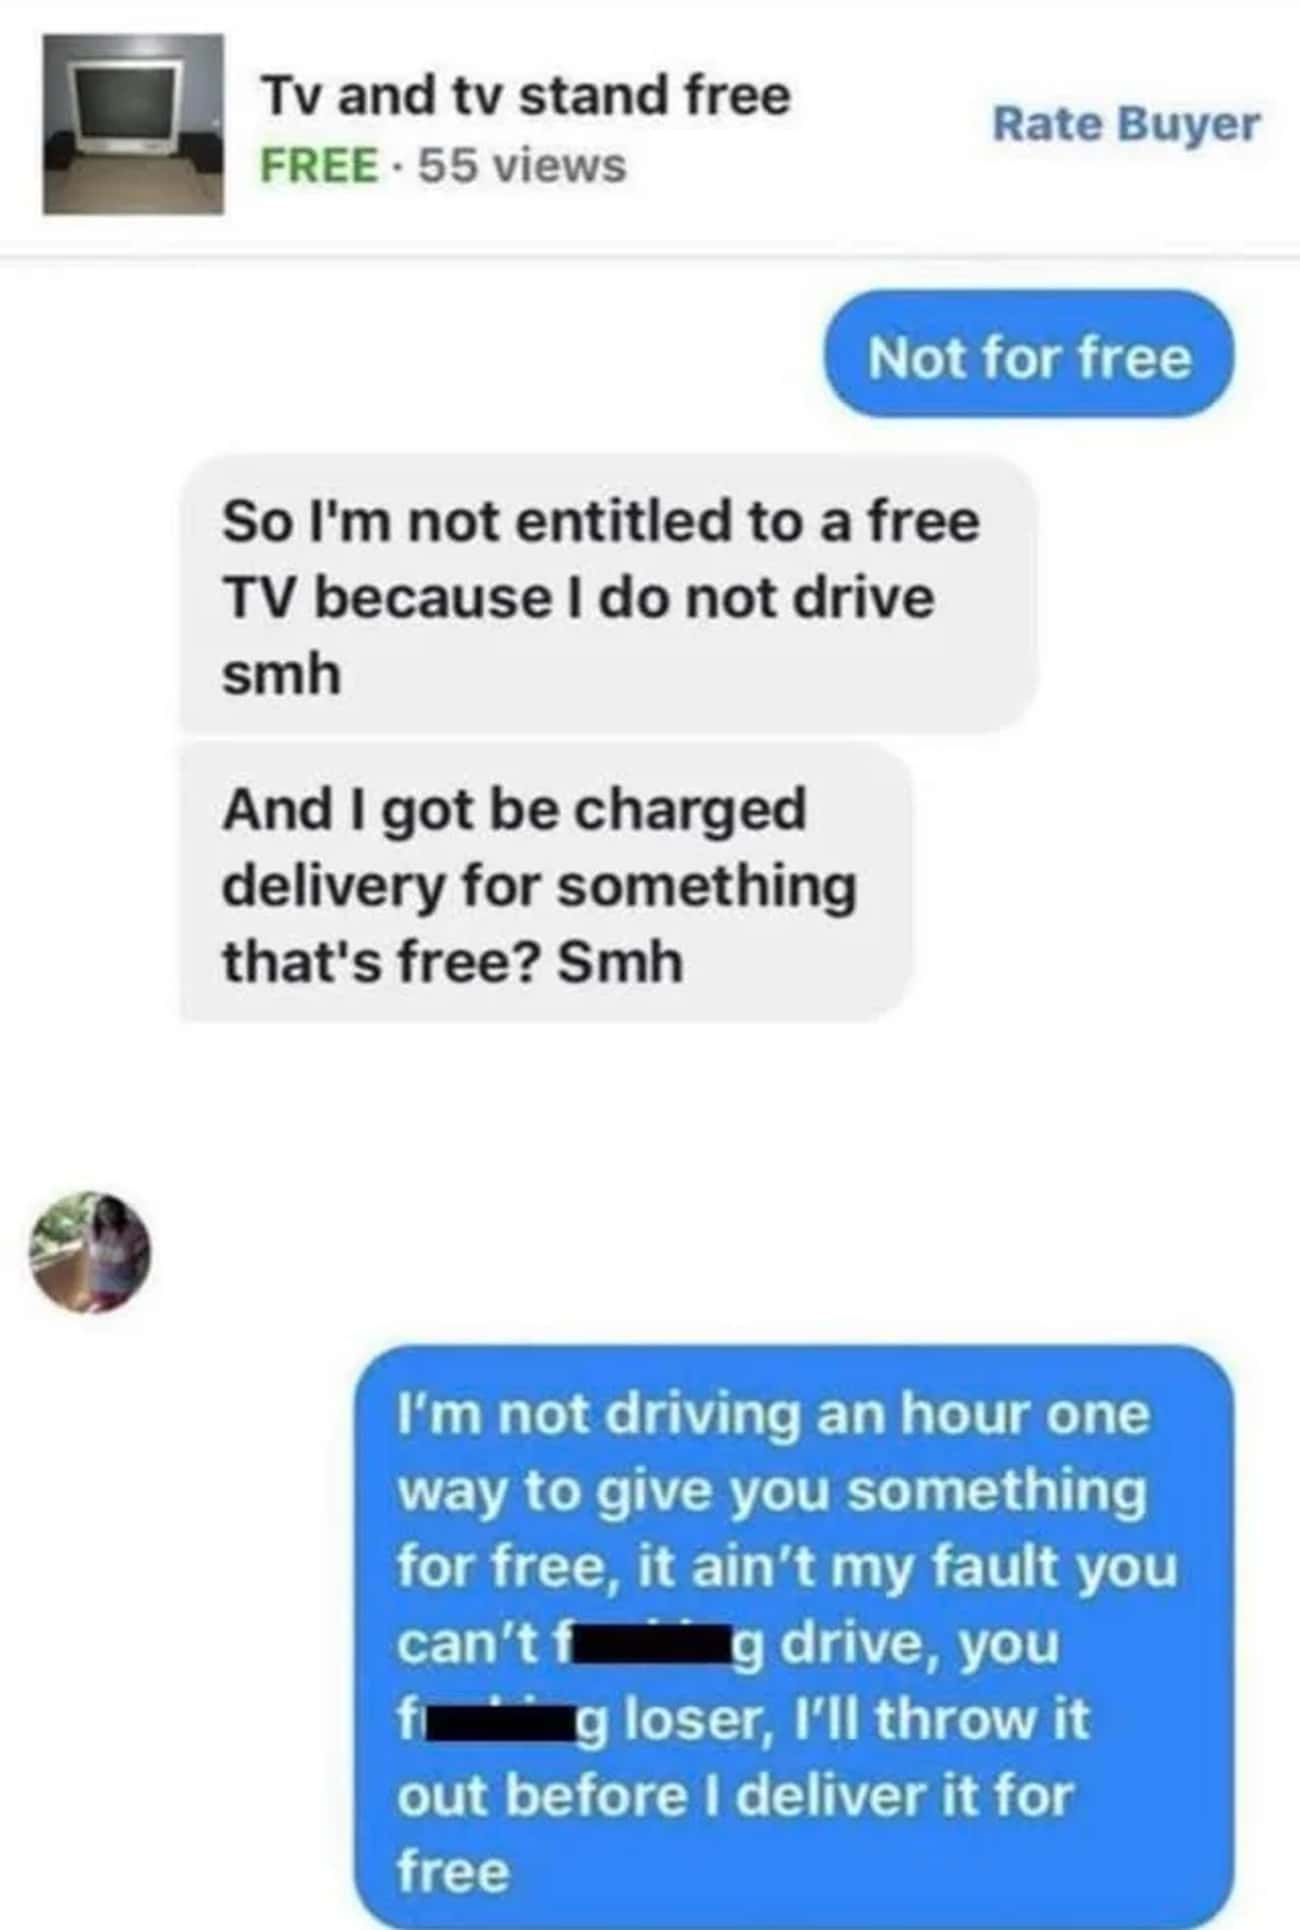 Buyer Is Angry Because Free TV Doesn't Come With Free Delivery